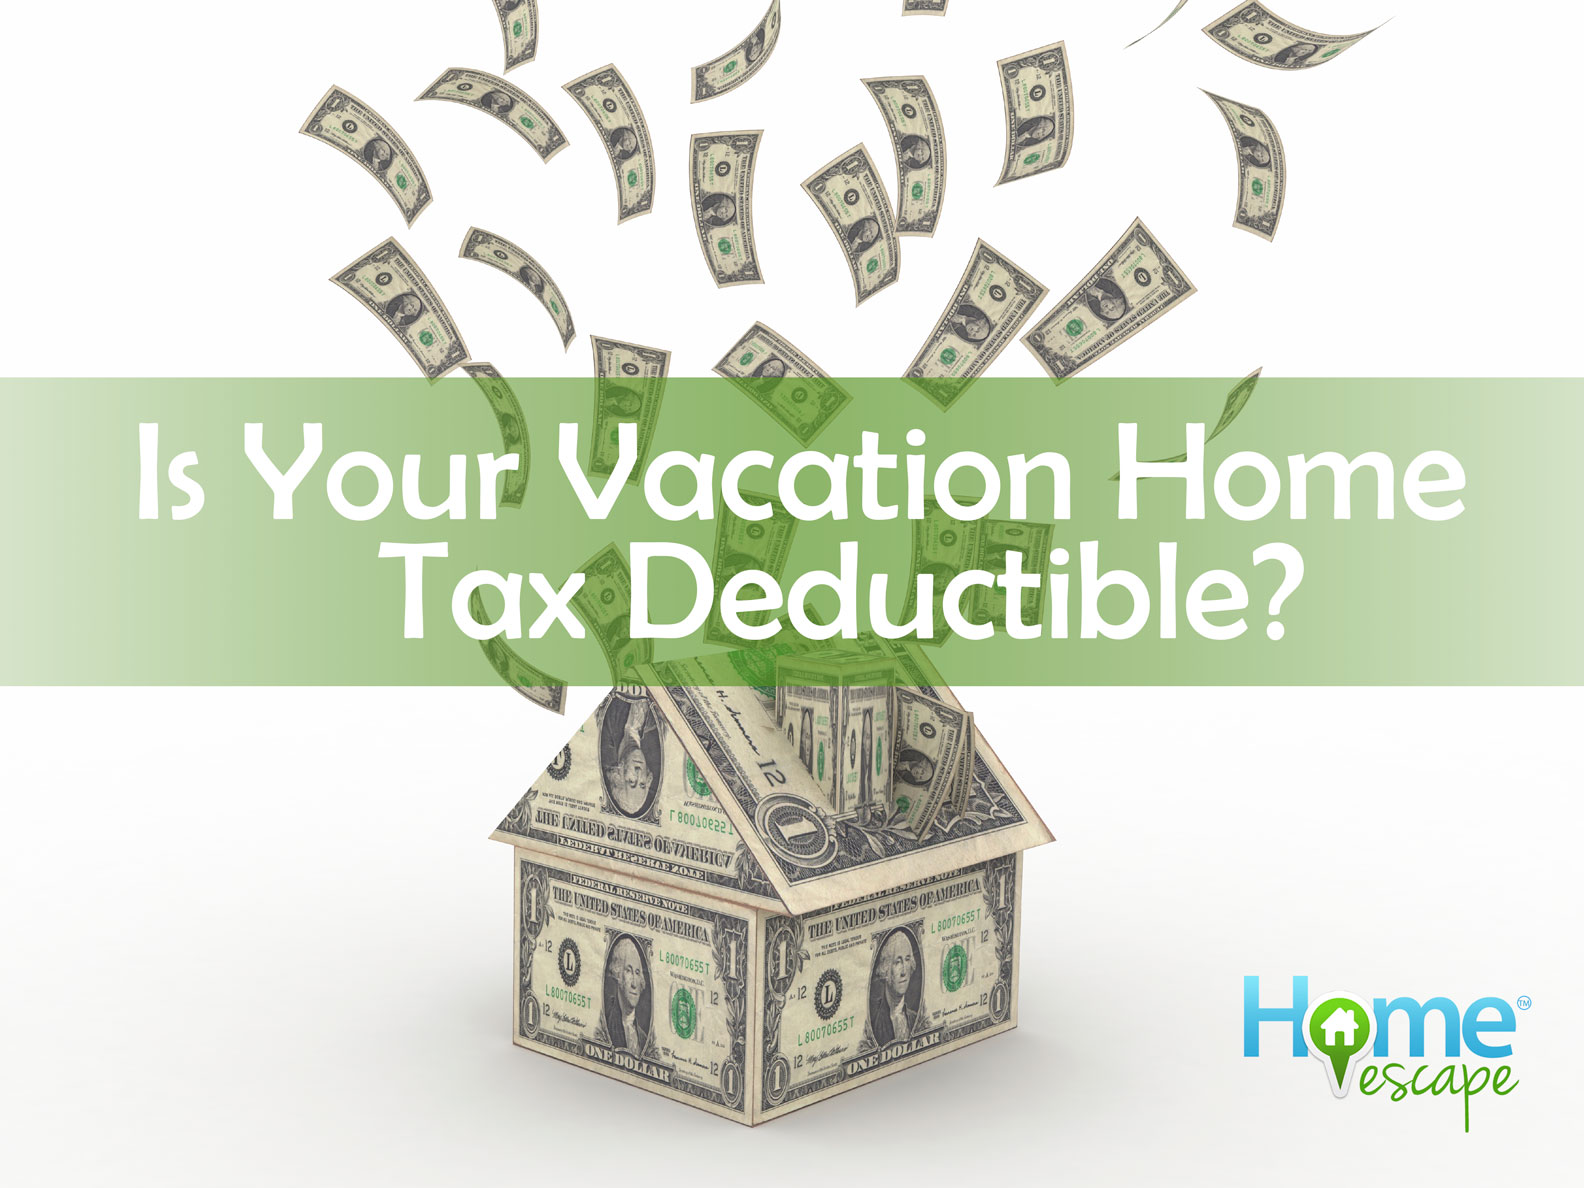 Is Your Vacation Home Tax Deductible?